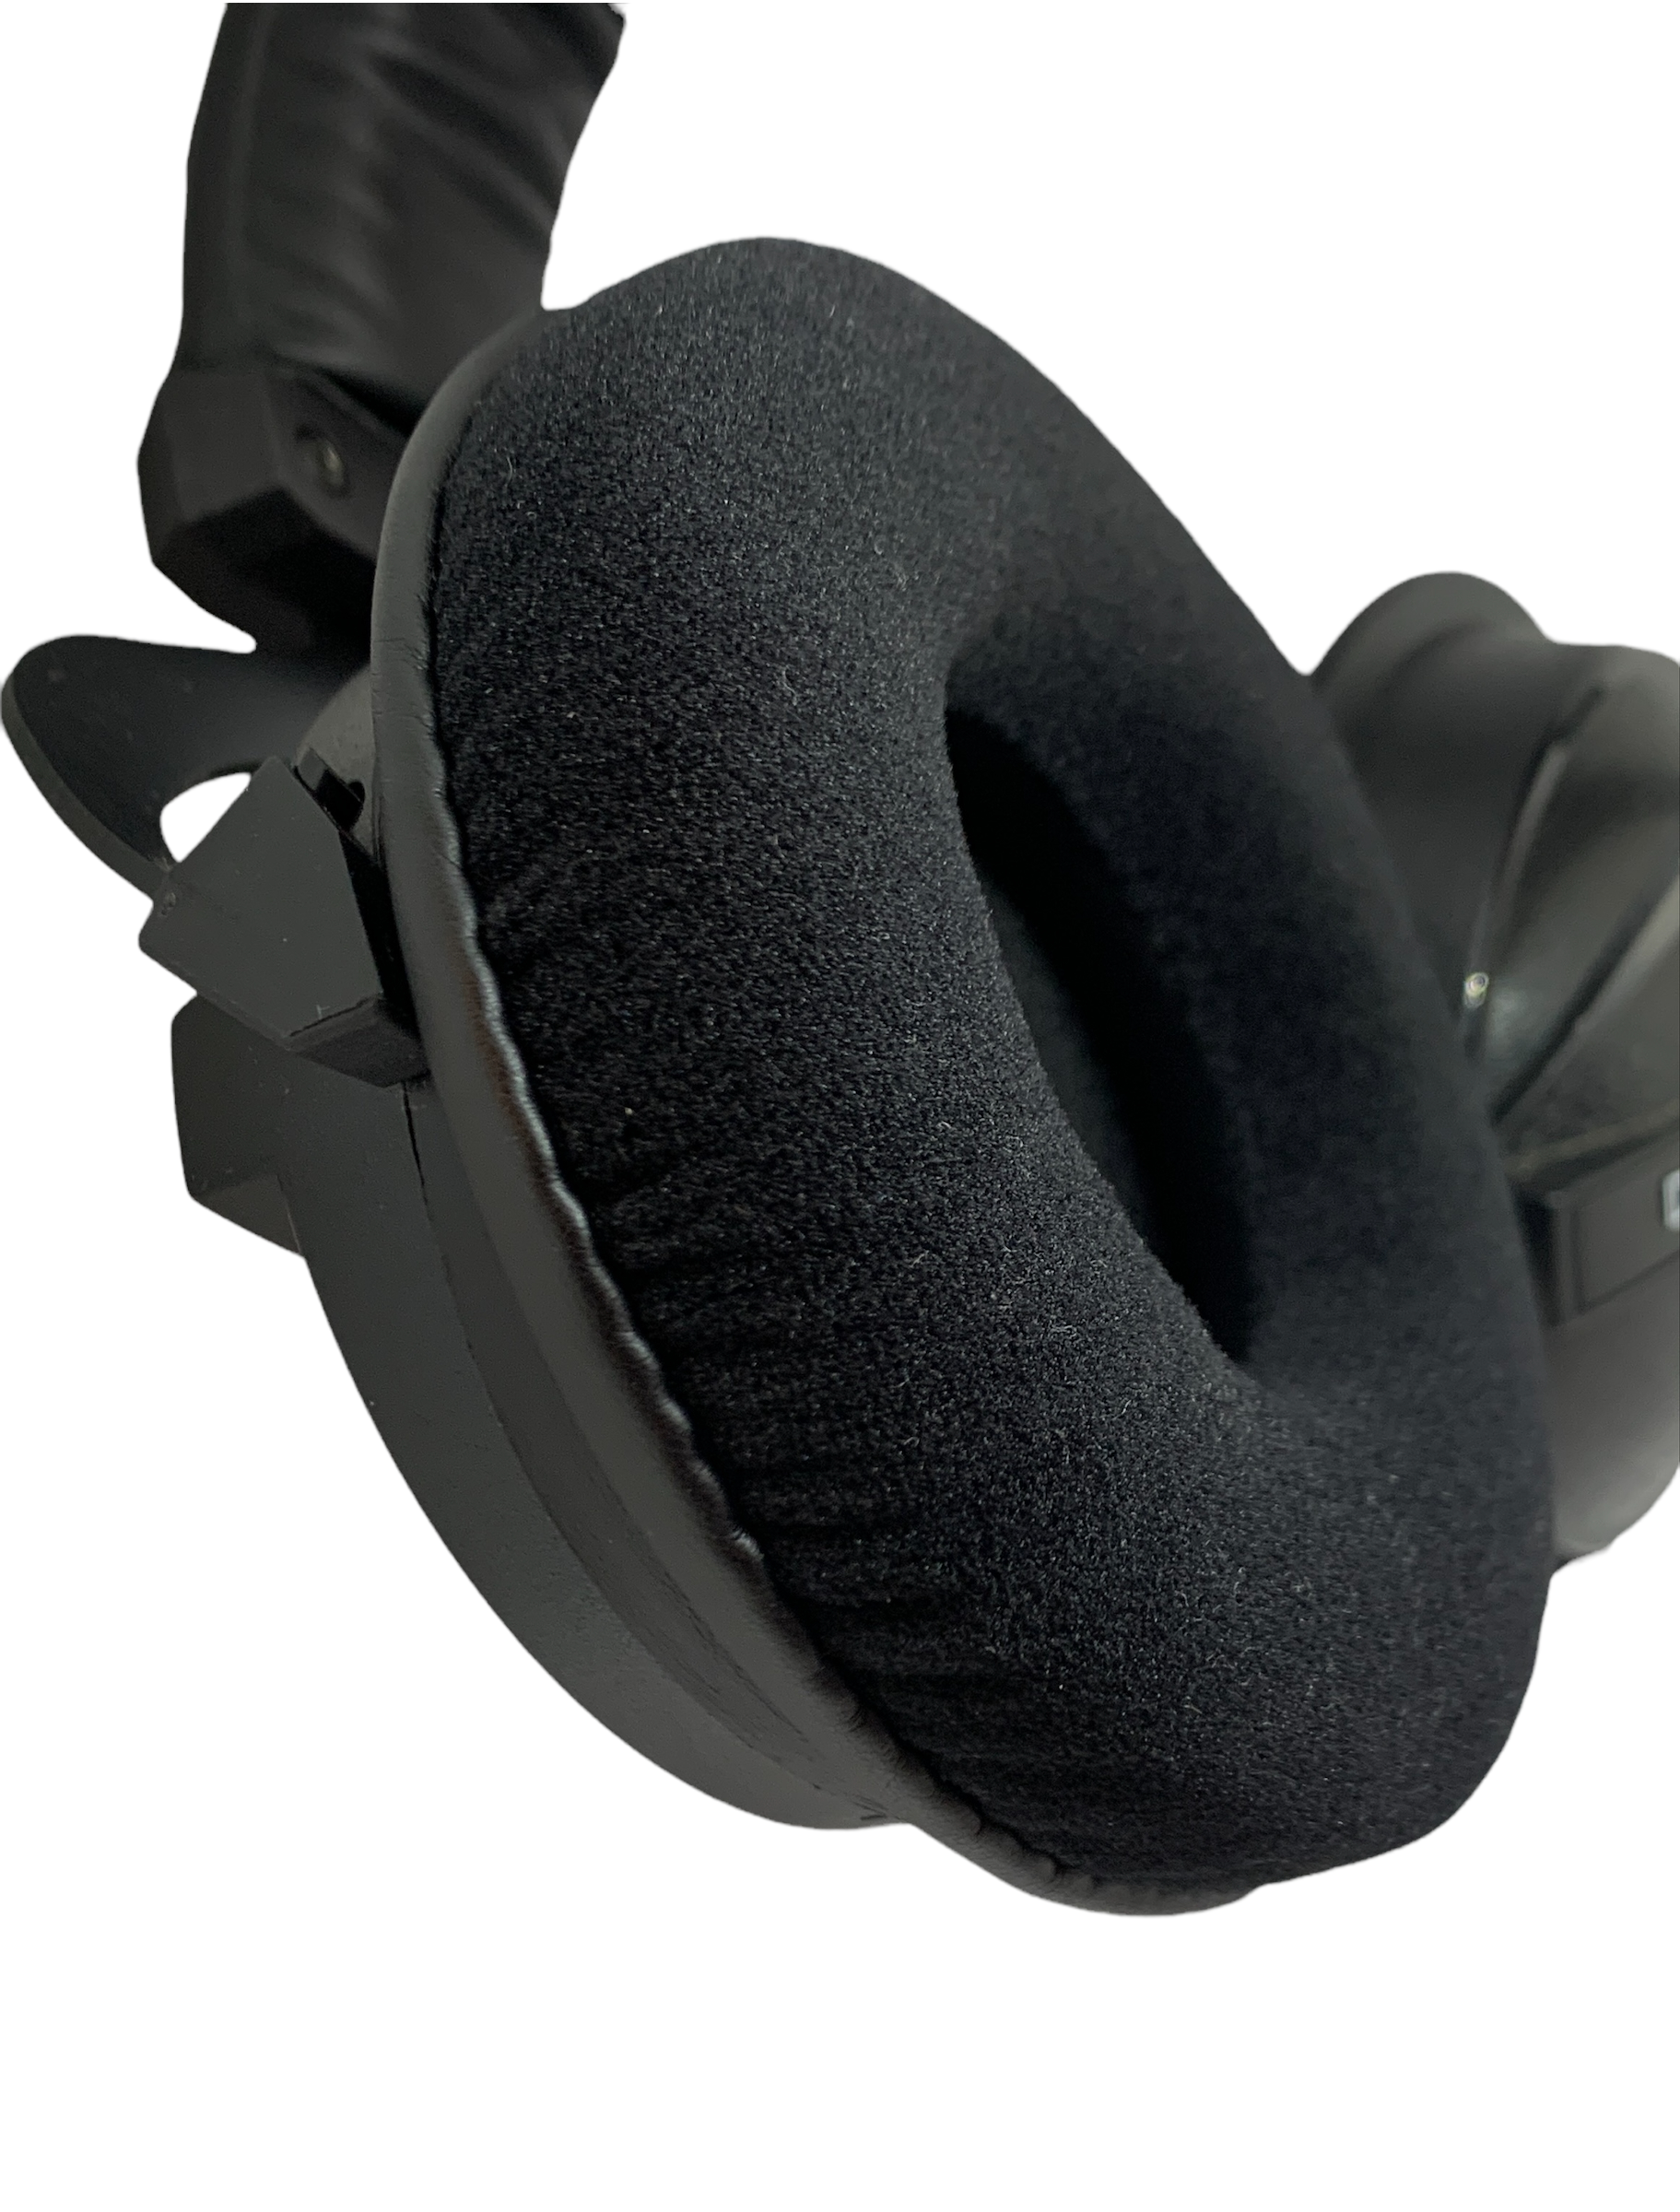 CentralSound USA Velour Replacement Ear Pads for Beyerdynamic DT770 880 990 PRO Headphones - CentralSound